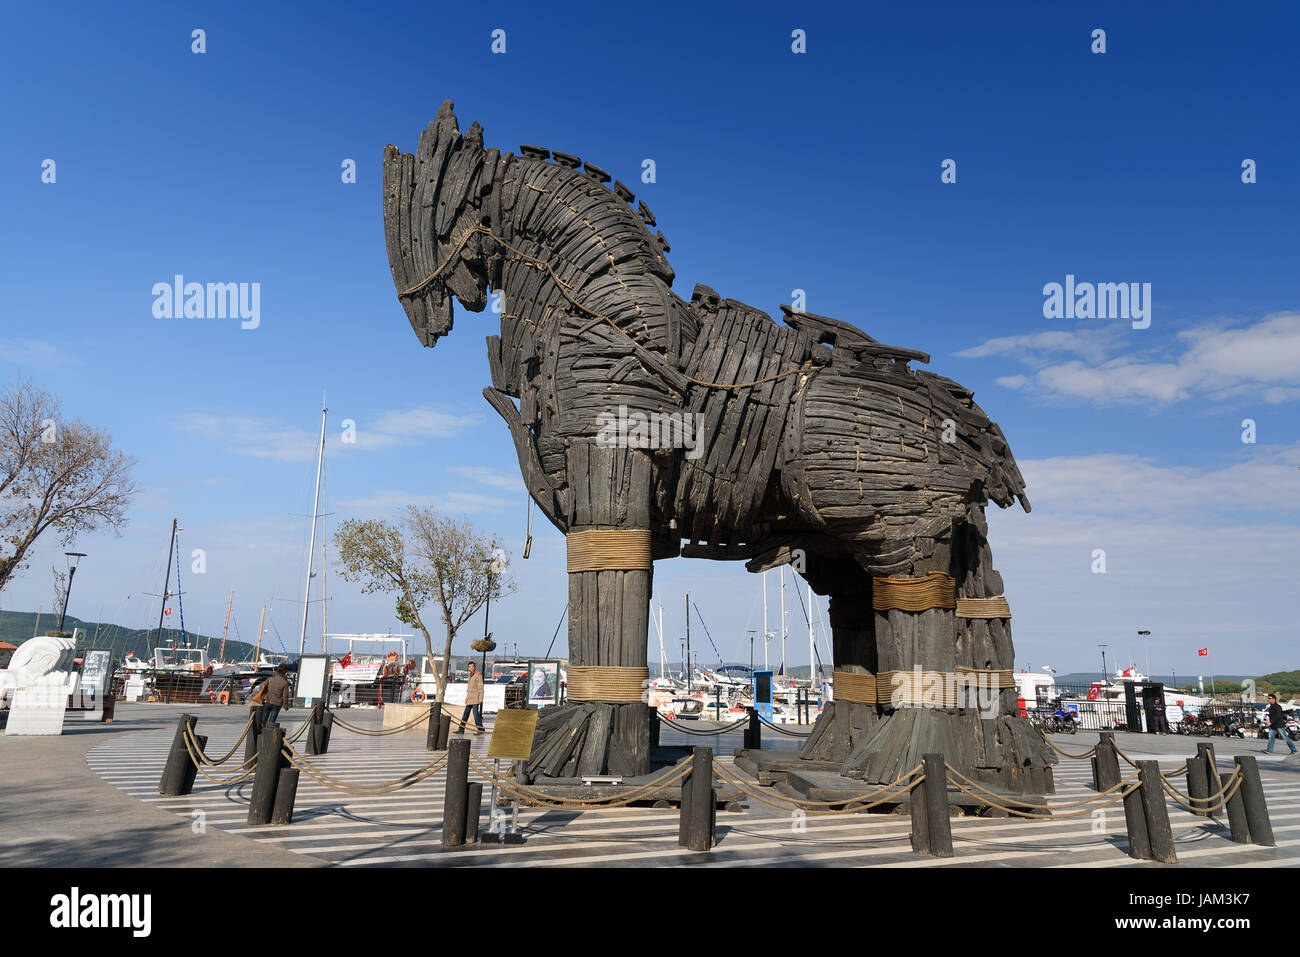 Canakkale, Turkey - October 31, 2016: Wooden Trojan Horse from movie Troy. It was donated to the city of Canakkale Stock Photo